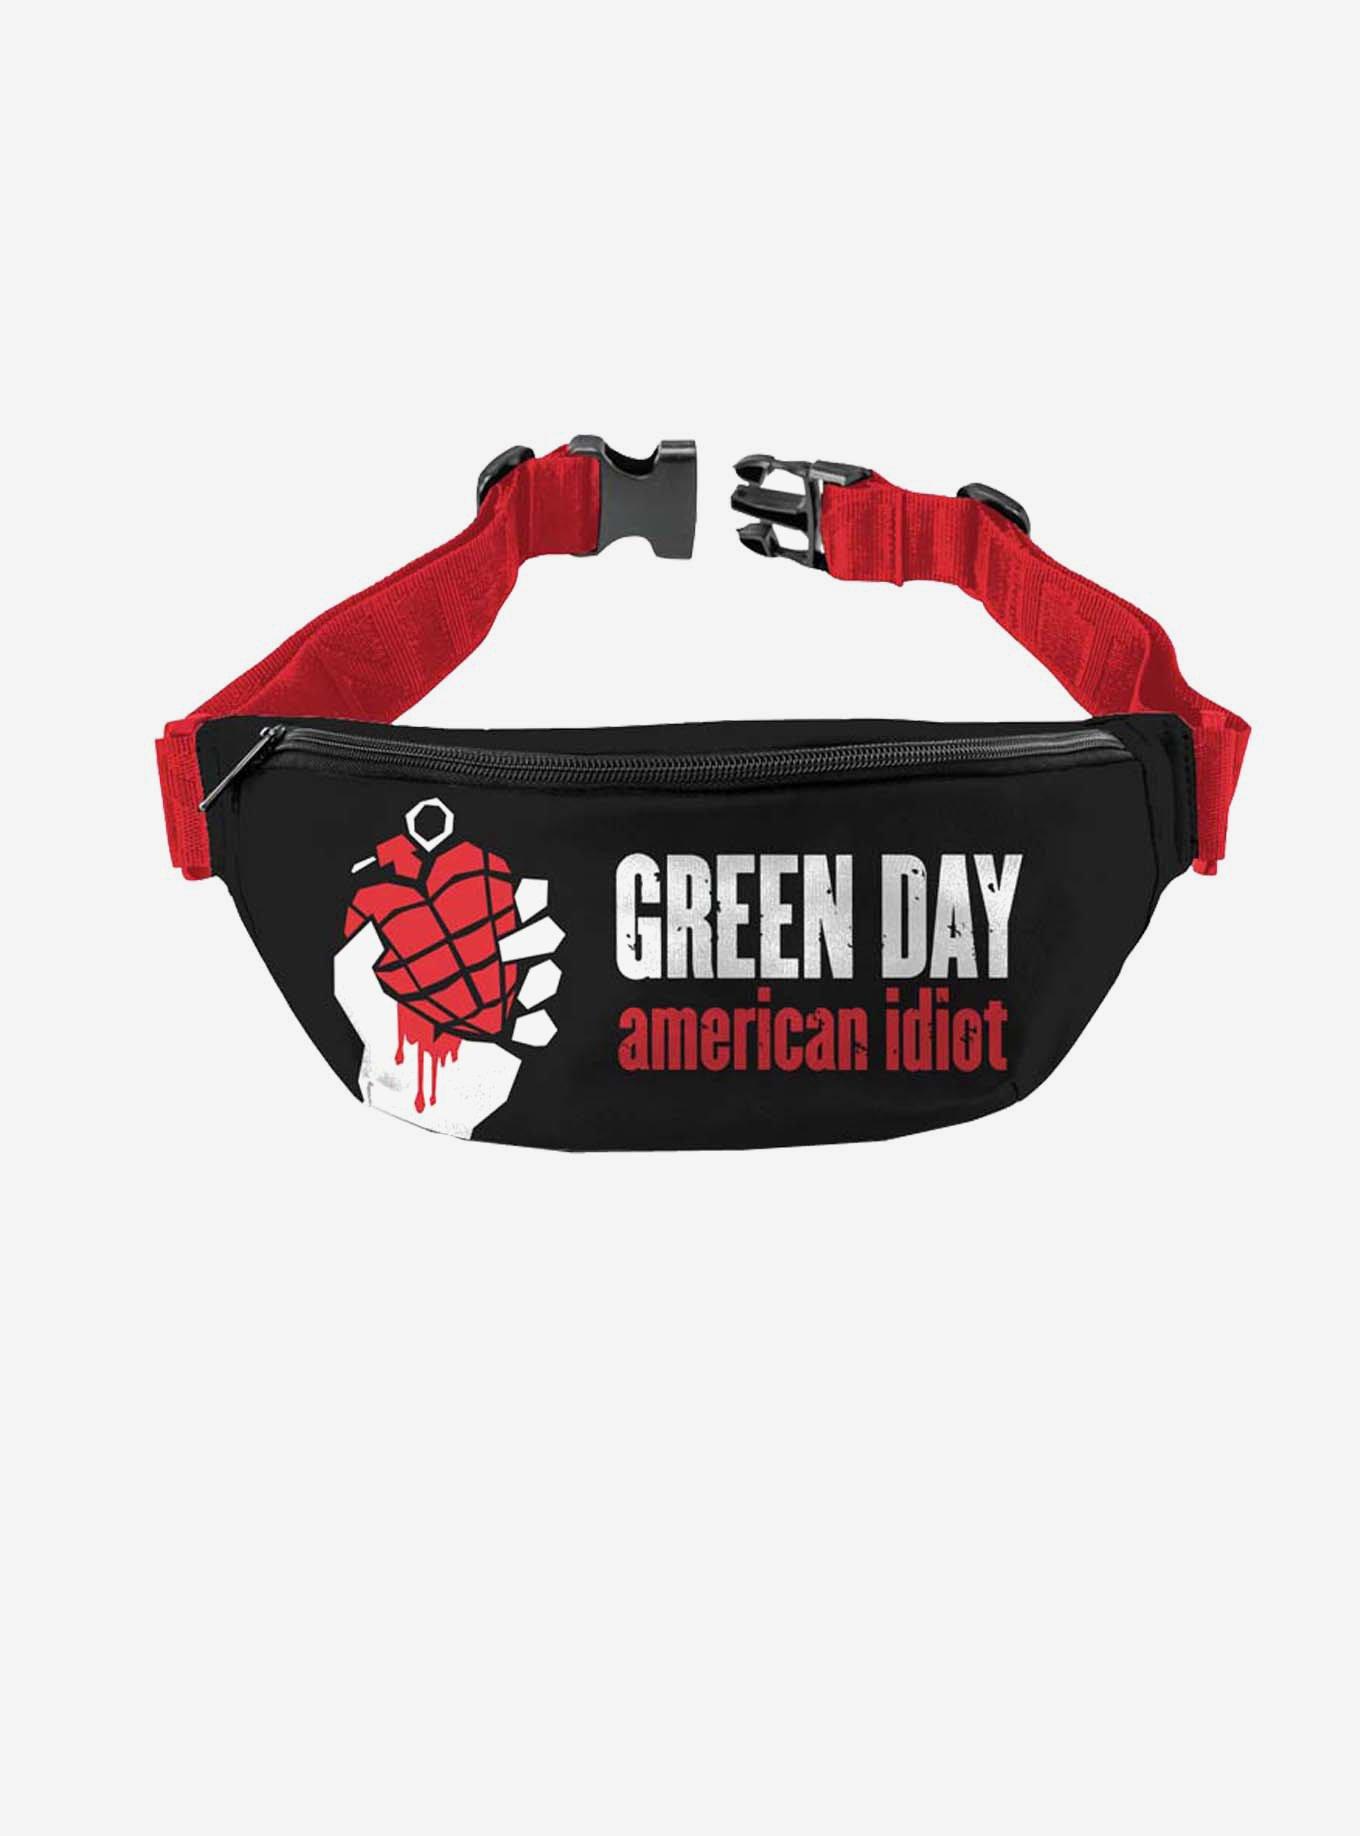 Rocksax Green Day American Idiot Fanny Pack